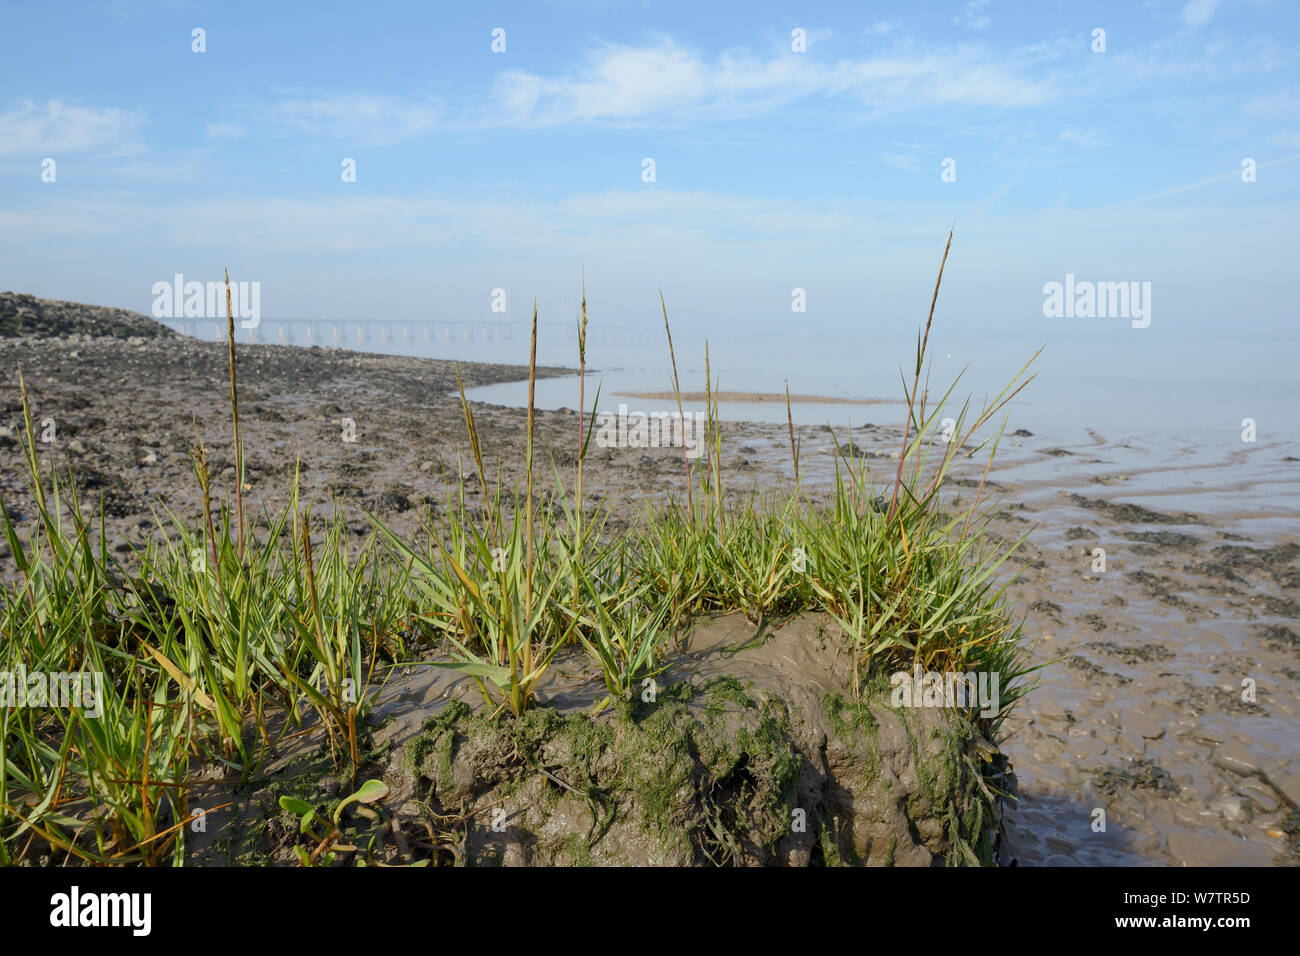 Saltmarsh edge on the Severn estuary stabilised with flowering Spartina / Cord grass (Spartina sp.) with the second Severn crossing on the background, Somerset, UK, September. Stock Photo